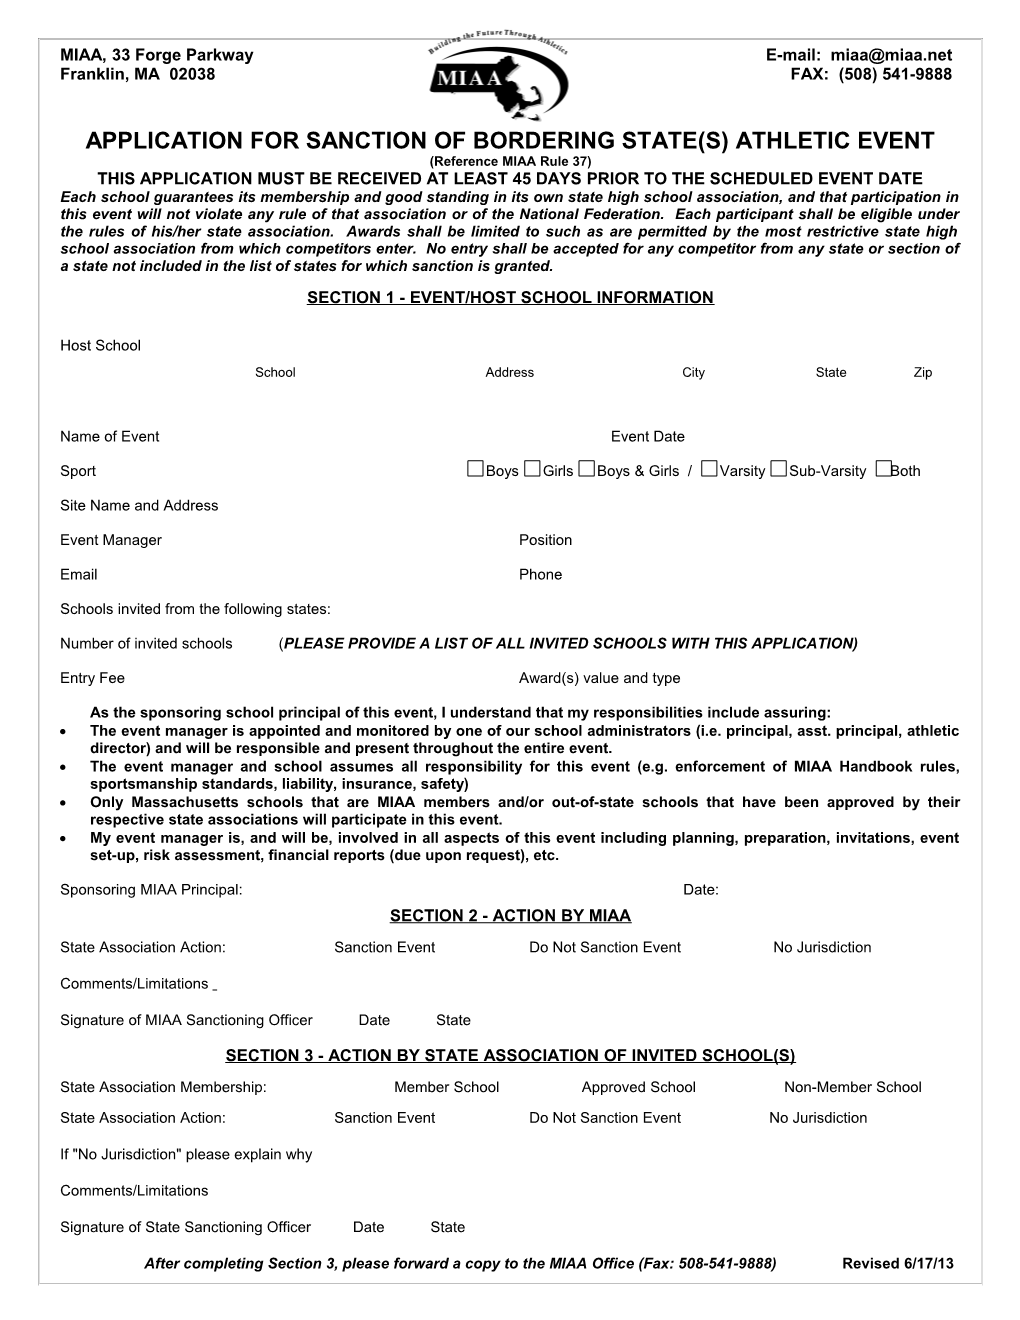 Application for Sanction of Bordering State(S) Athletic Event